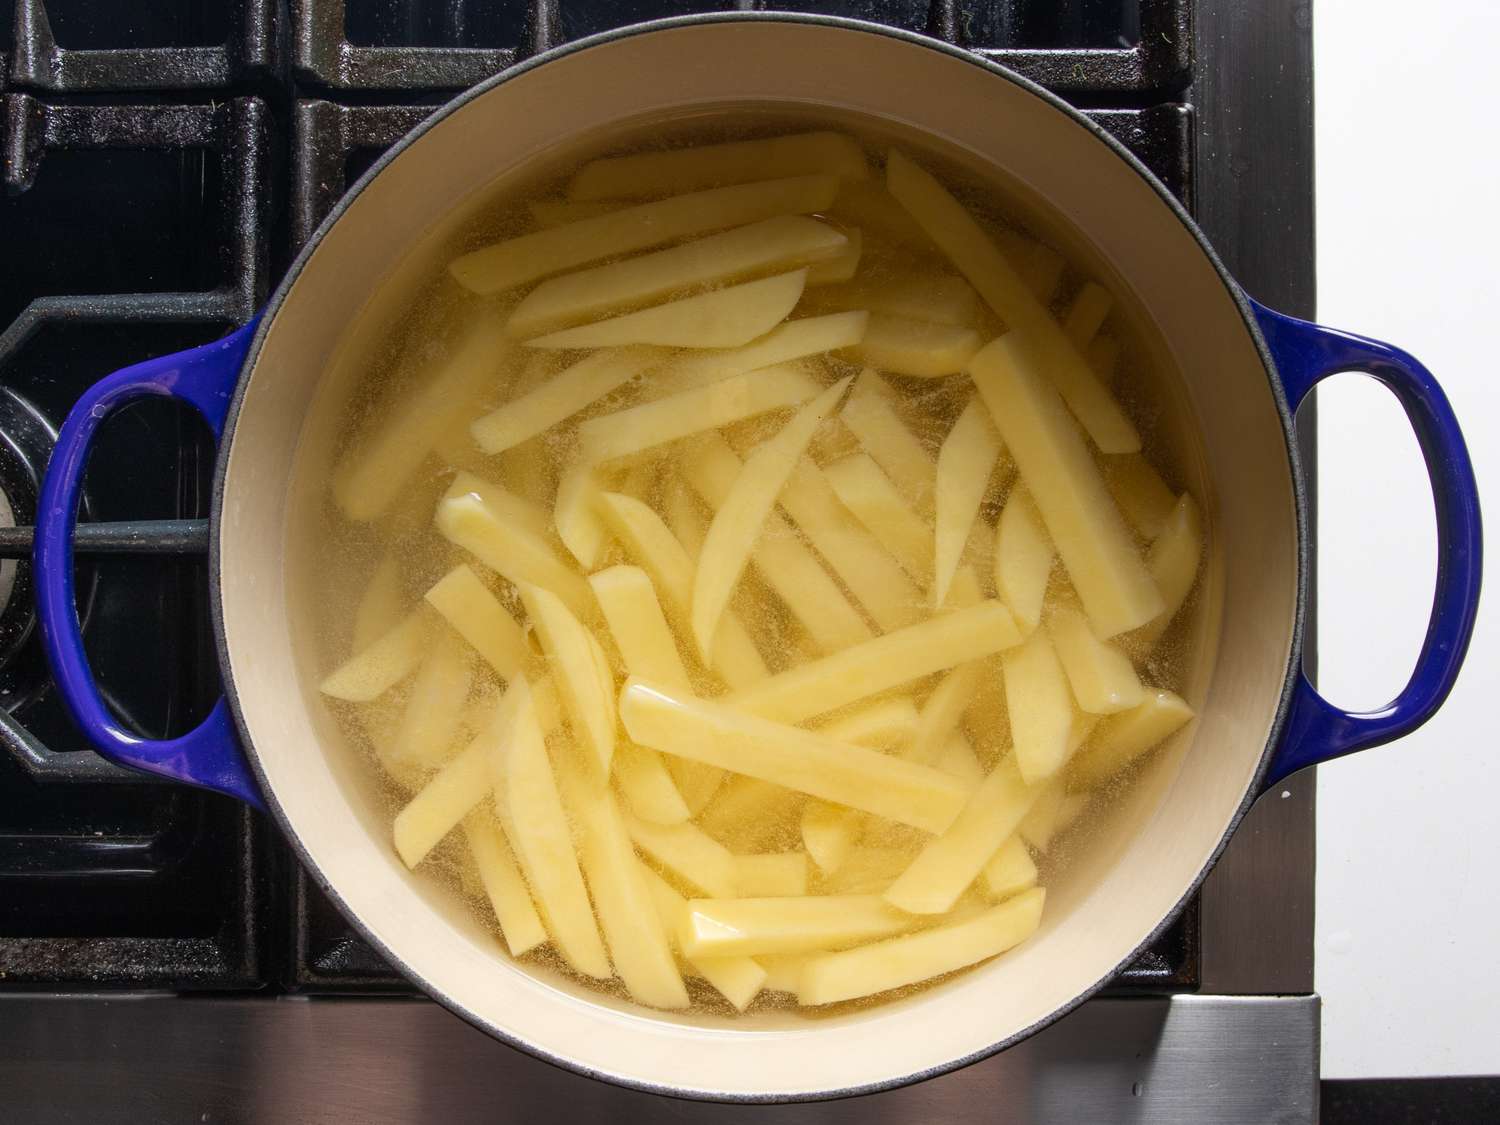 Par-cooking the fries in vinegary water.